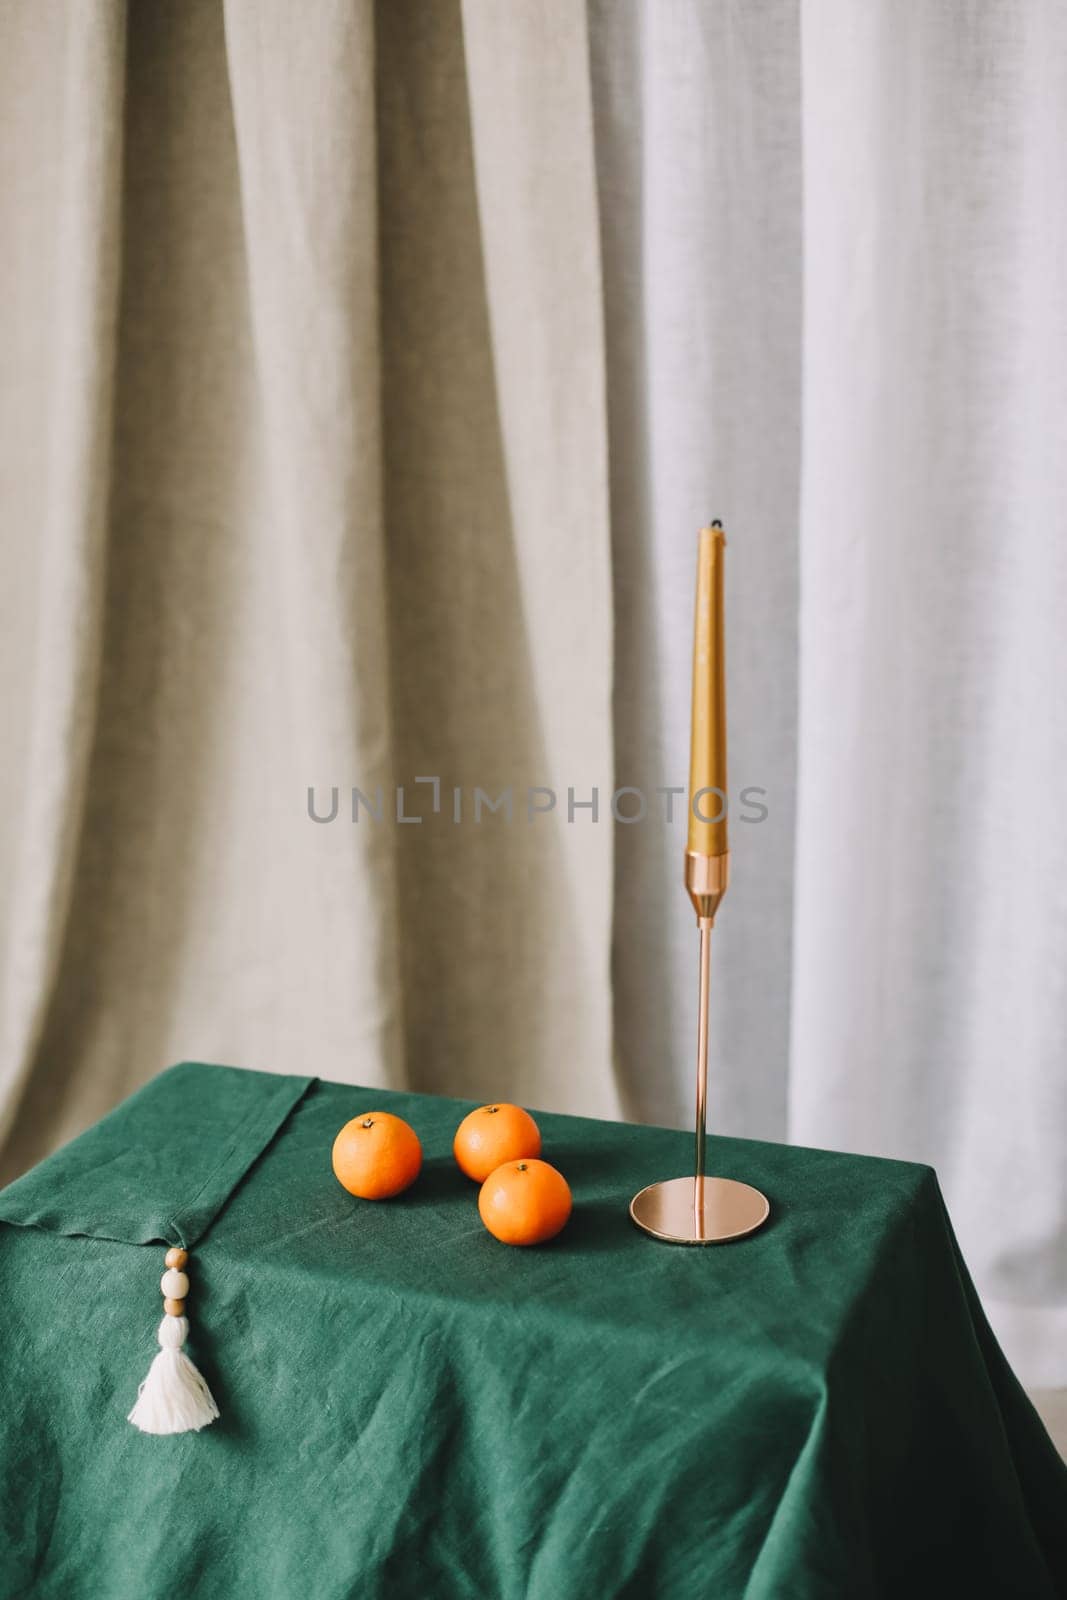 Stylish home decor in rustic style. Table with a golden candle in candlestick, green tablecloth, tangerines. Festive Cozy room decorated for Christmas or New year. by paralisart